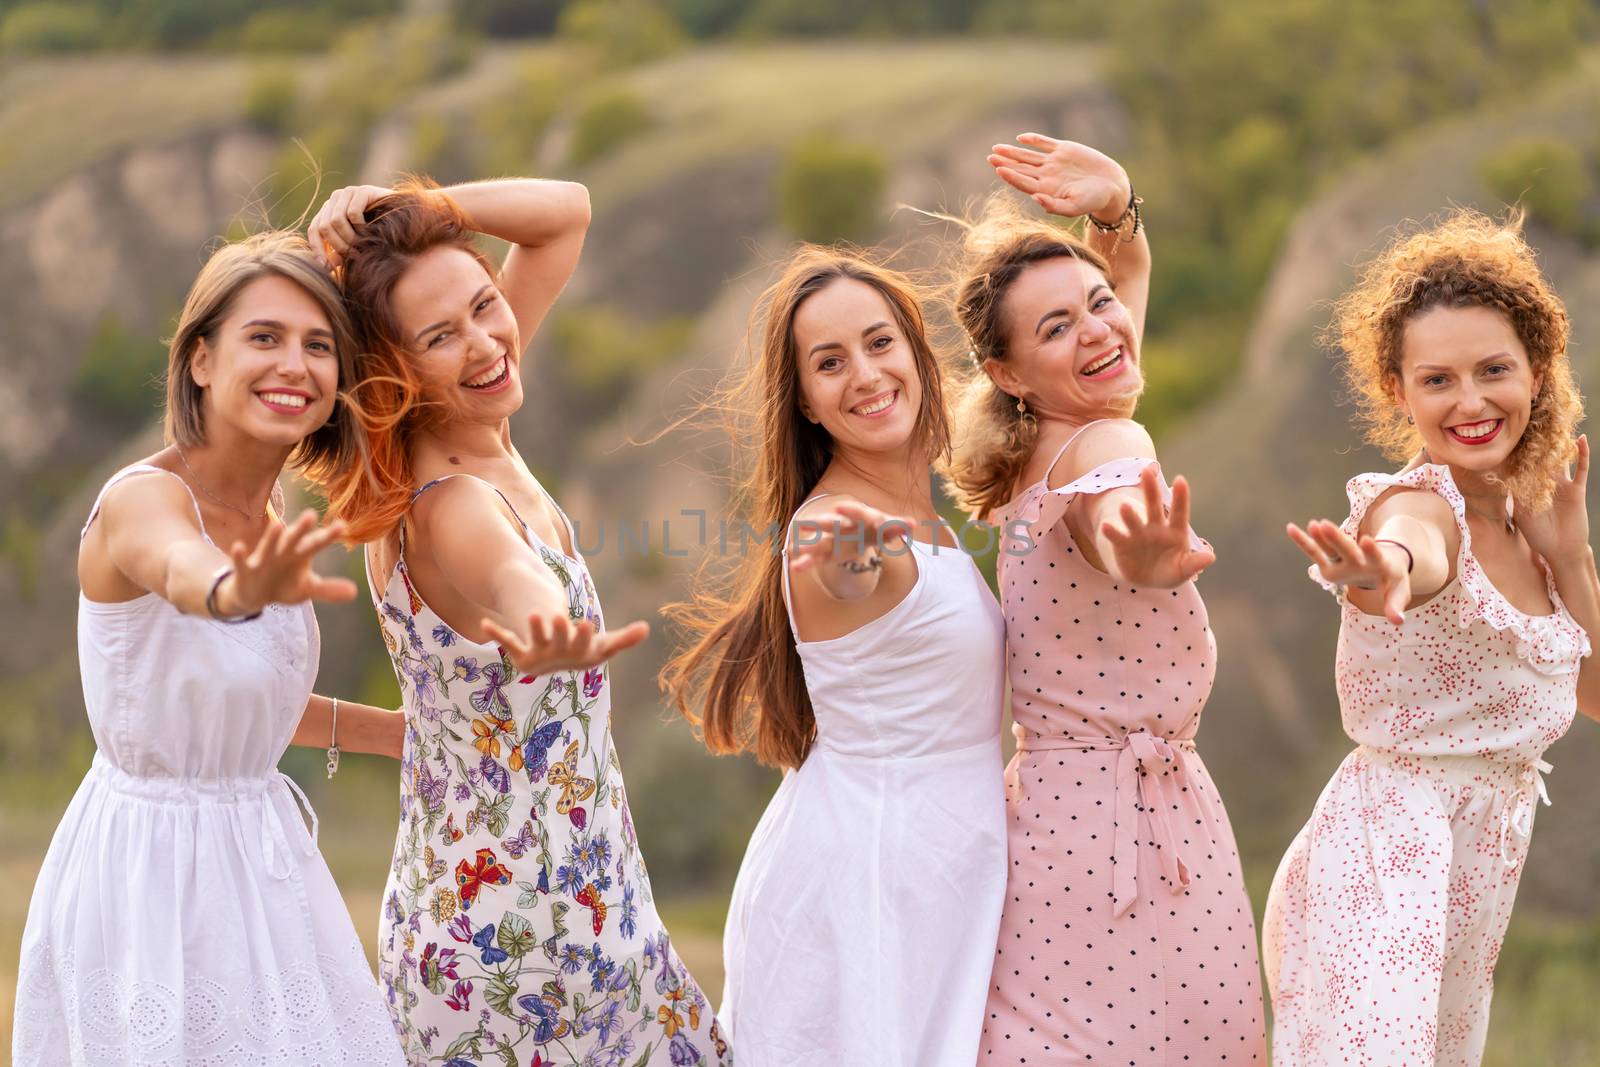 A cheerful company of beautiful girls friends enjoy the company and have fun together in a picturesque place of green hills